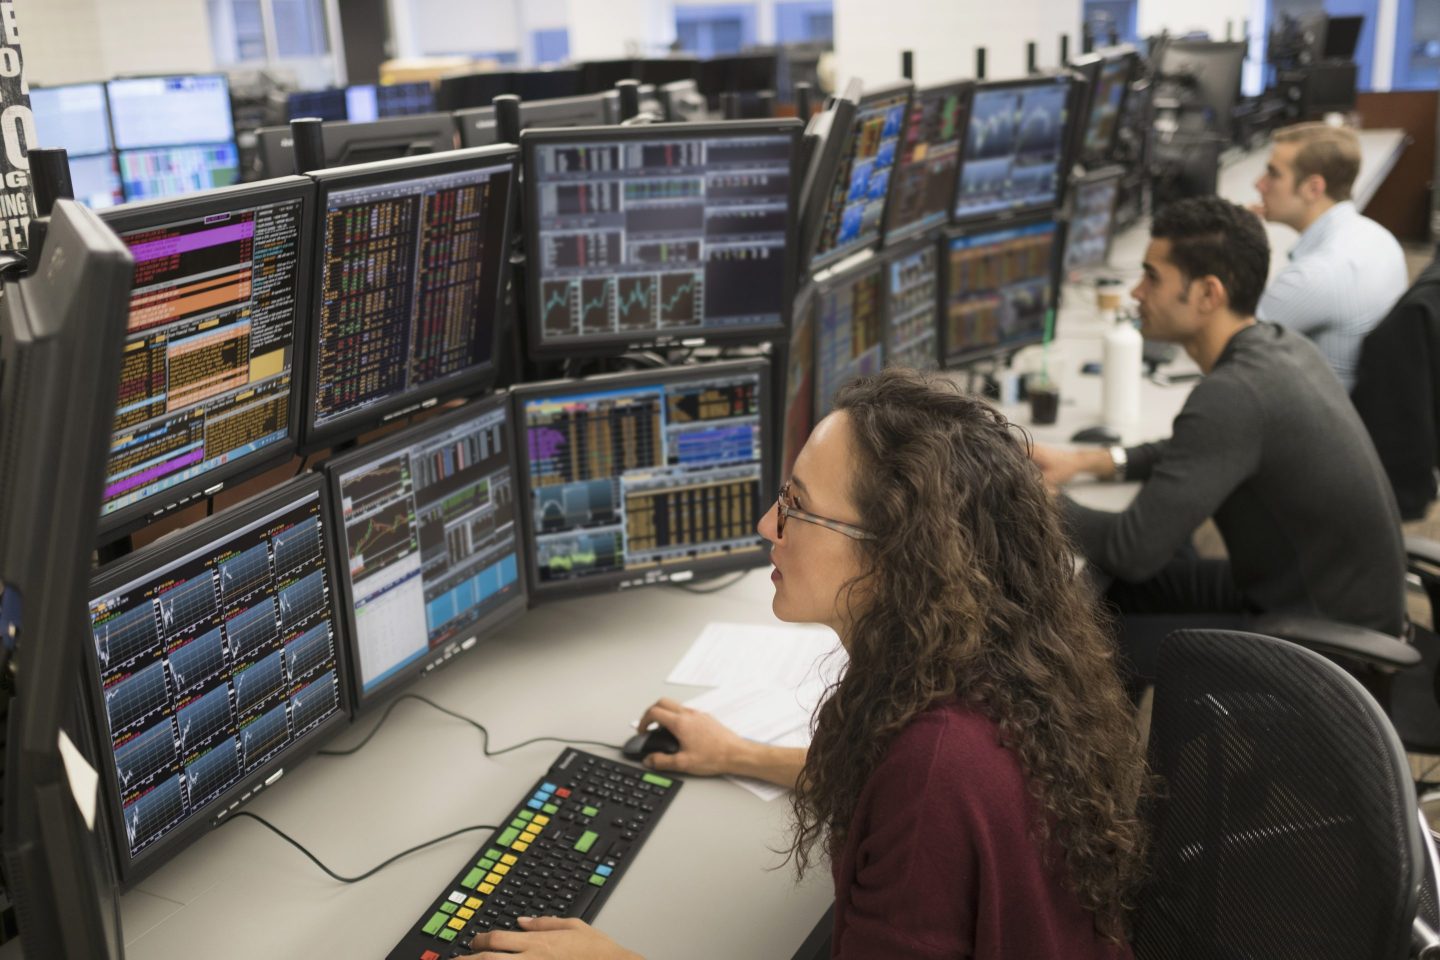 A woman stares at screens with financial data